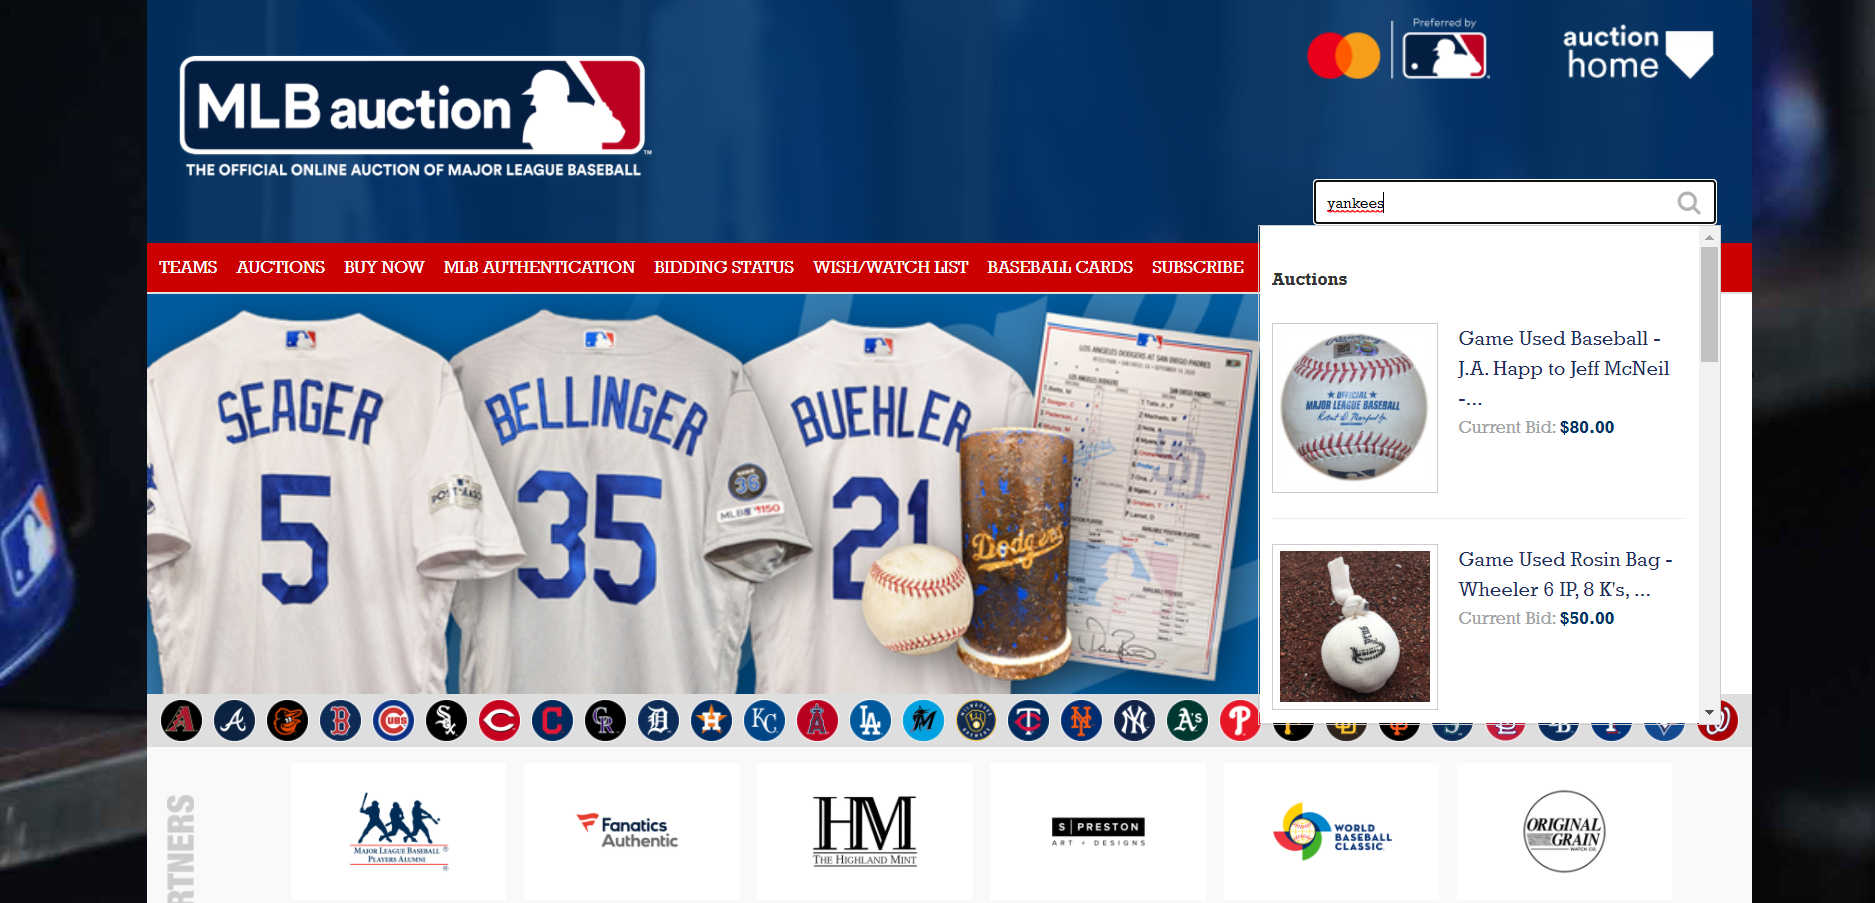 The Official Online Auction Site of the Los Angeles Dodgers